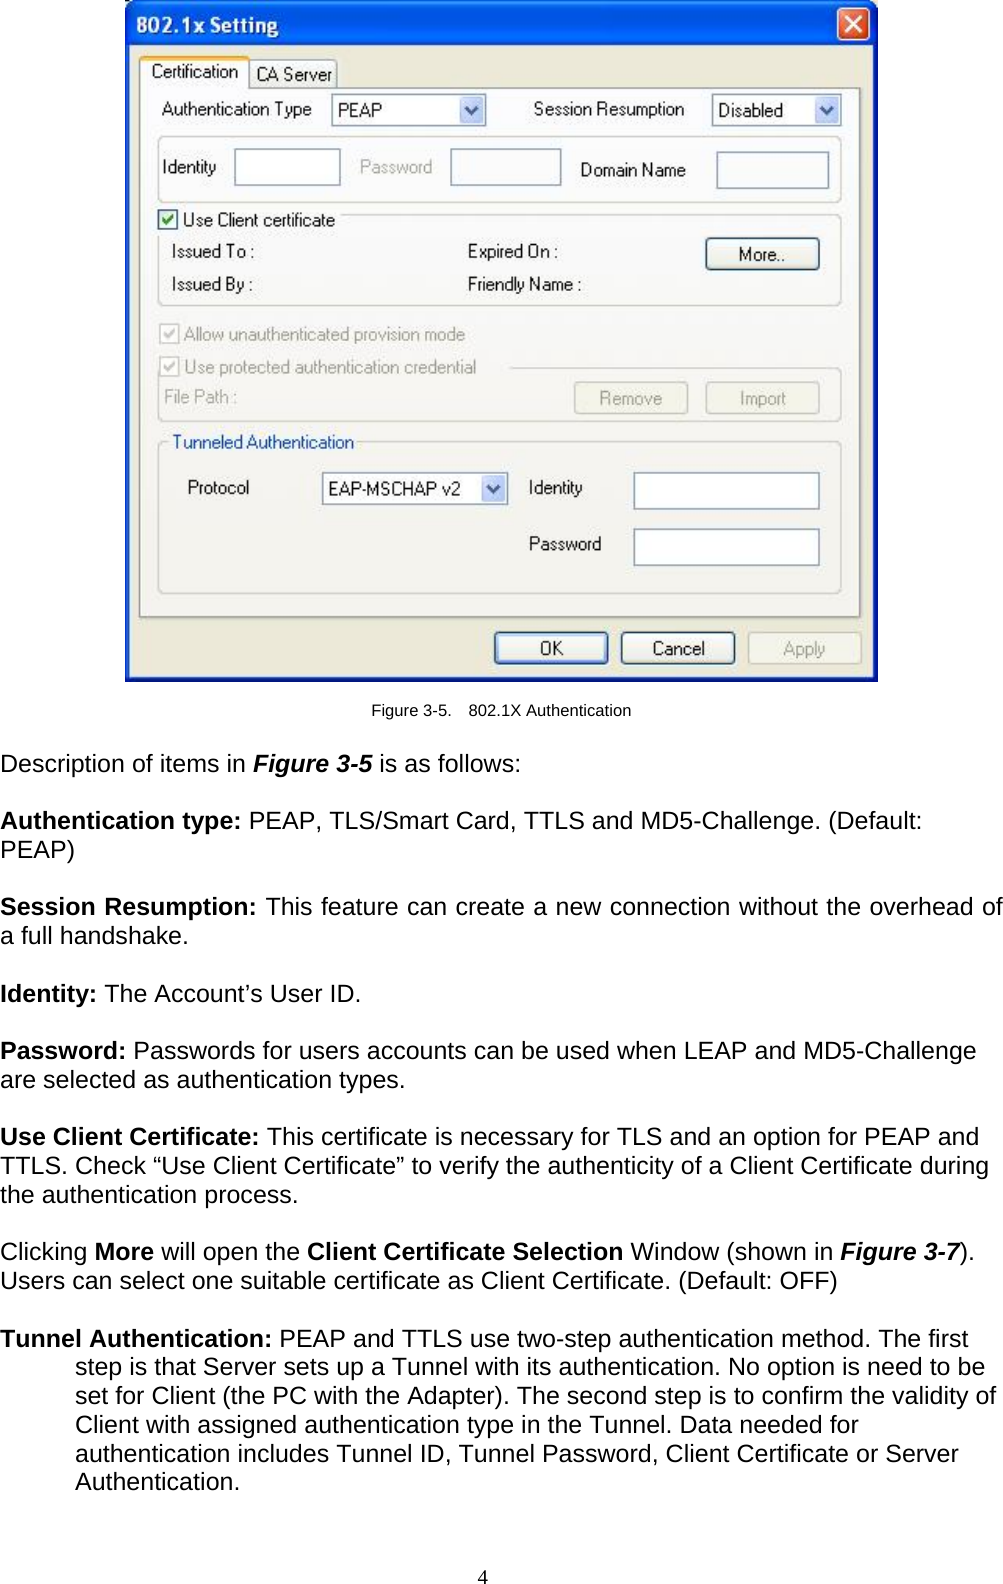 4     Figure 3-5.  802.1X Authentication  Description of items in Figure 3-5 is as follows:  Authentication type: PEAP, TLS/Smart Card, TTLS and MD5-Challenge. (Default: PEAP)  Session Resumption: This feature can create a new connection without the overhead of a full handshake.  Identity: The Account’s User ID.  Password: Passwords for users accounts can be used when LEAP and MD5-Challenge are selected as authentication types.  Use Client Certificate: This certificate is necessary for TLS and an option for PEAP and TTLS. Check “Use Client Certificate” to verify the authenticity of a Client Certificate during the authentication process.    Clicking More will open the Client Certificate Selection Window (shown in Figure 3-7). Users can select one suitable certificate as Client Certificate. (Default: OFF)  Tunnel Authentication: PEAP and TTLS use two-step authentication method. The first step is that Server sets up a Tunnel with its authentication. No option is need to be set for Client (the PC with the Adapter). The second step is to confirm the validity of Client with assigned authentication type in the Tunnel. Data needed for authentication includes Tunnel ID, Tunnel Password, Client Certificate or Server Authentication.  